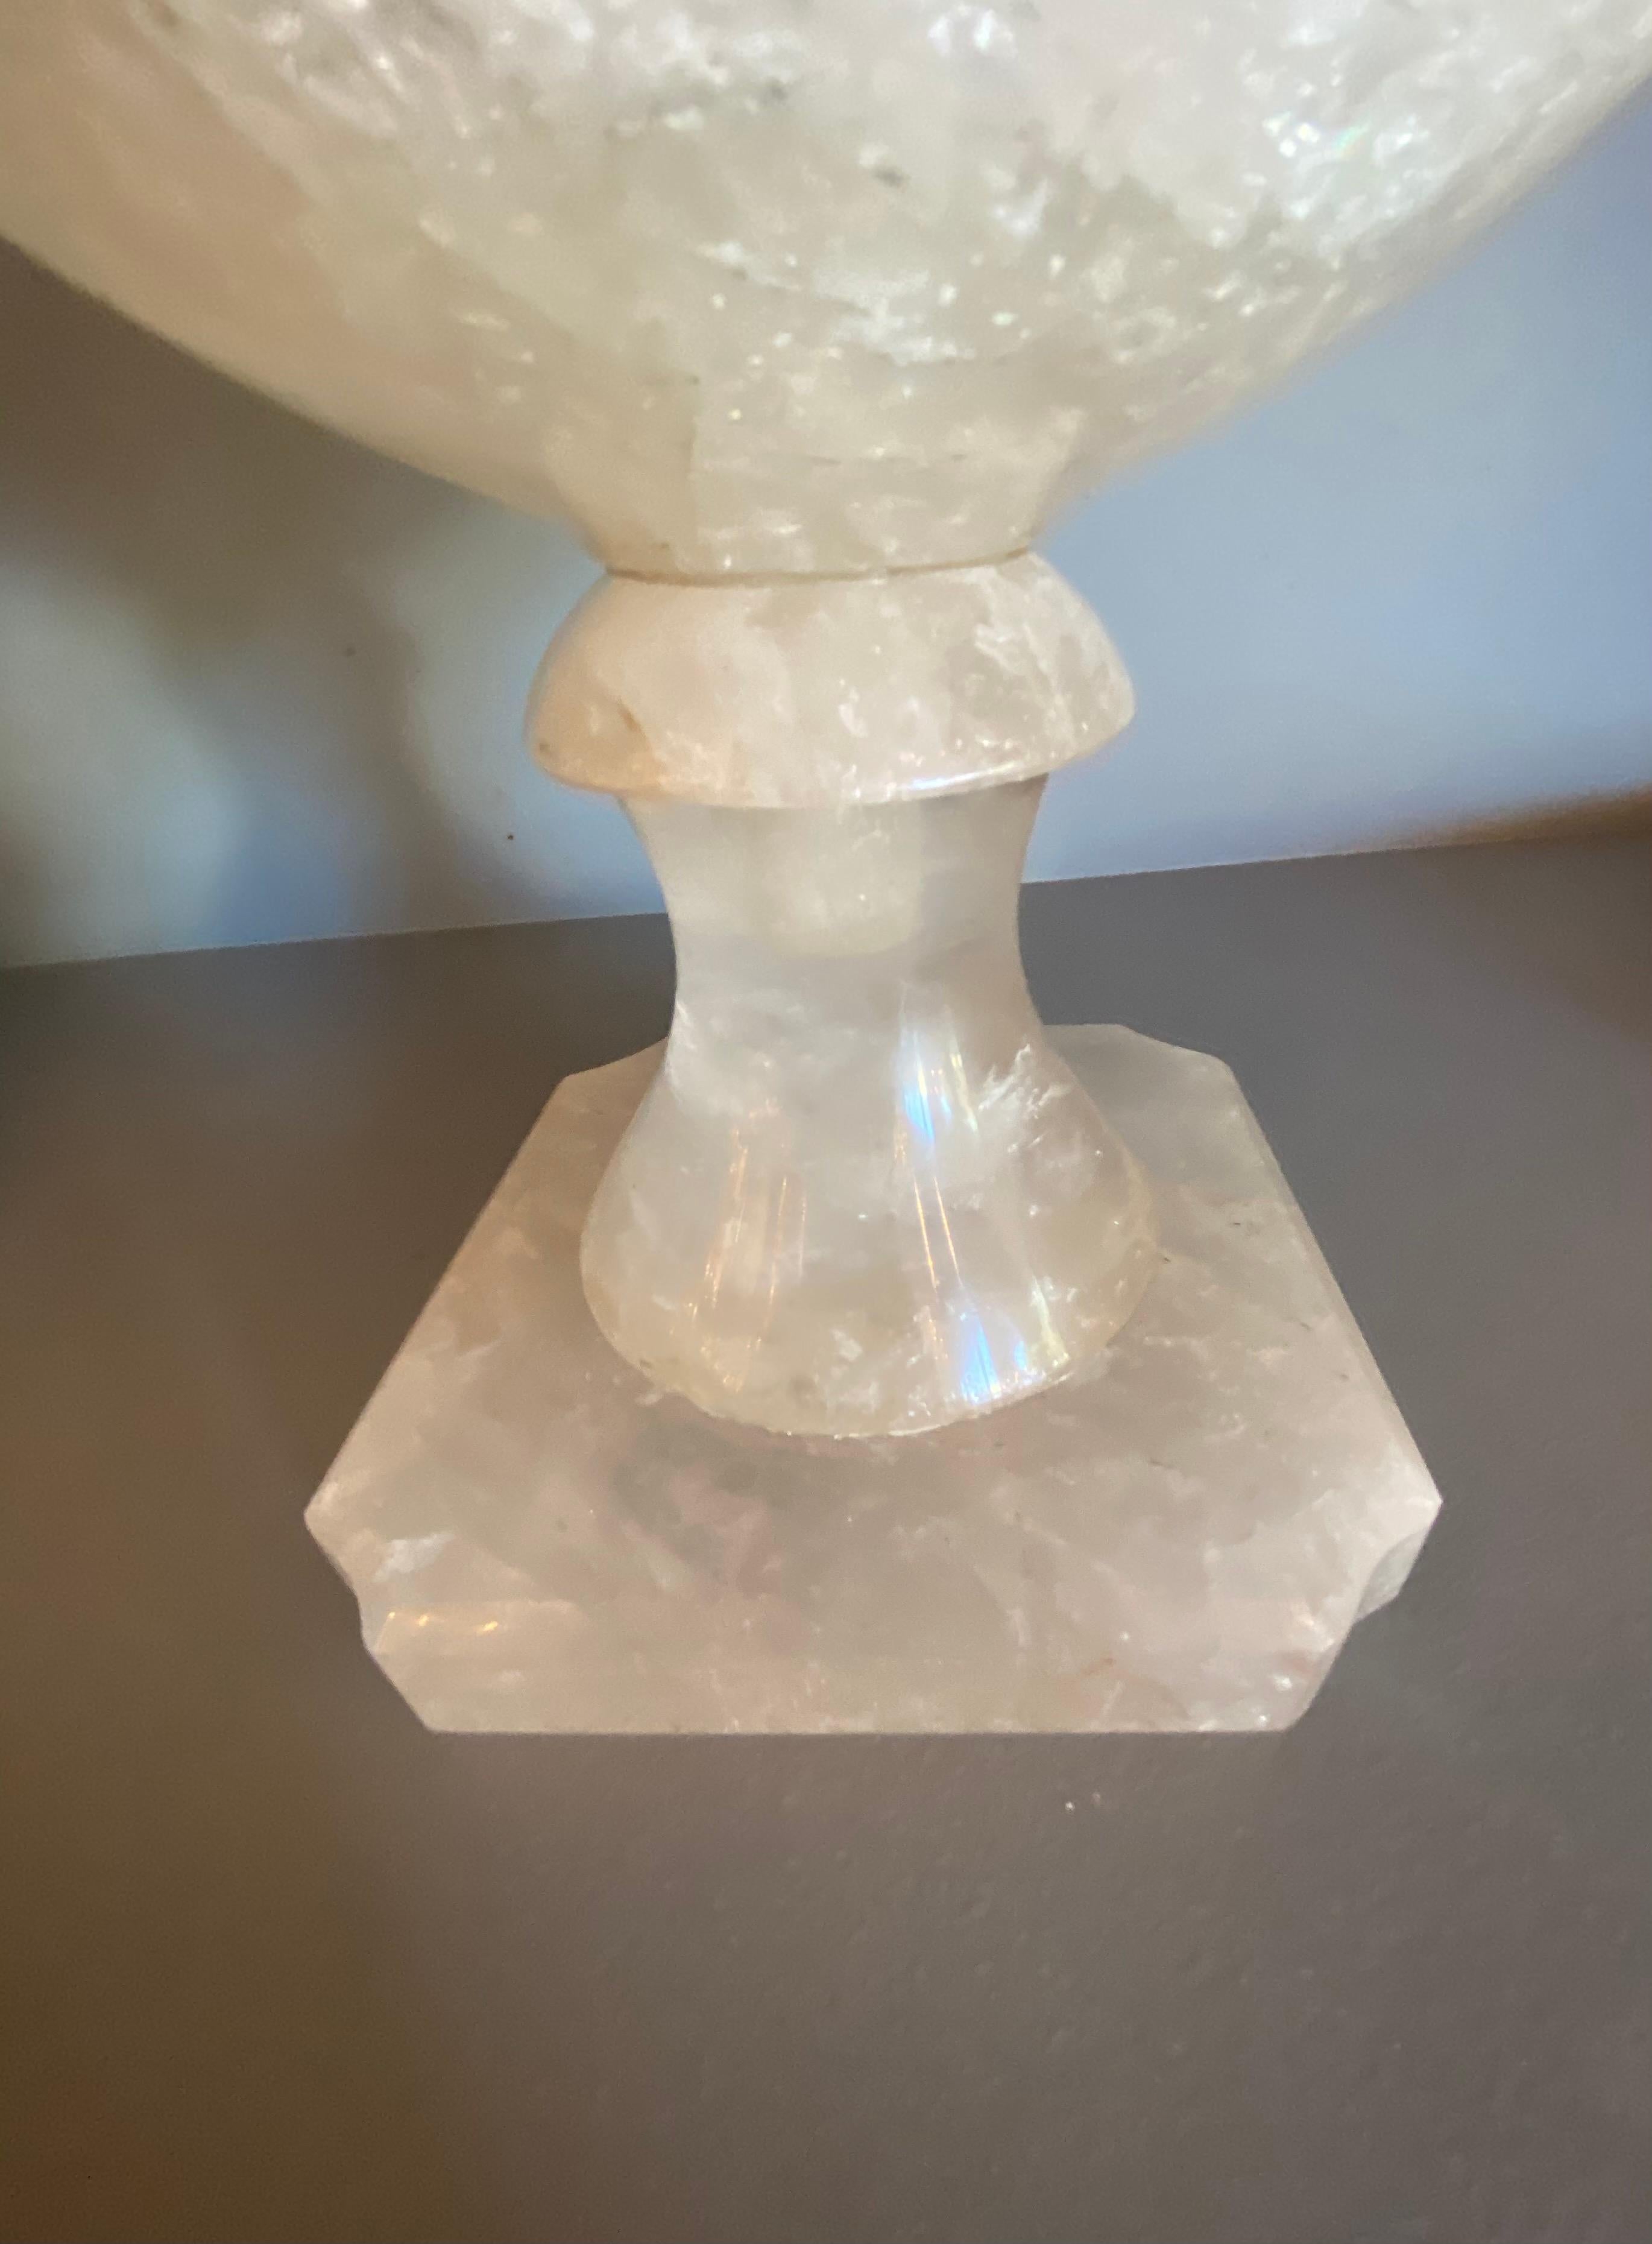 Small Brazilian rock crystal urn in excellent conditions, hollow in the inside.